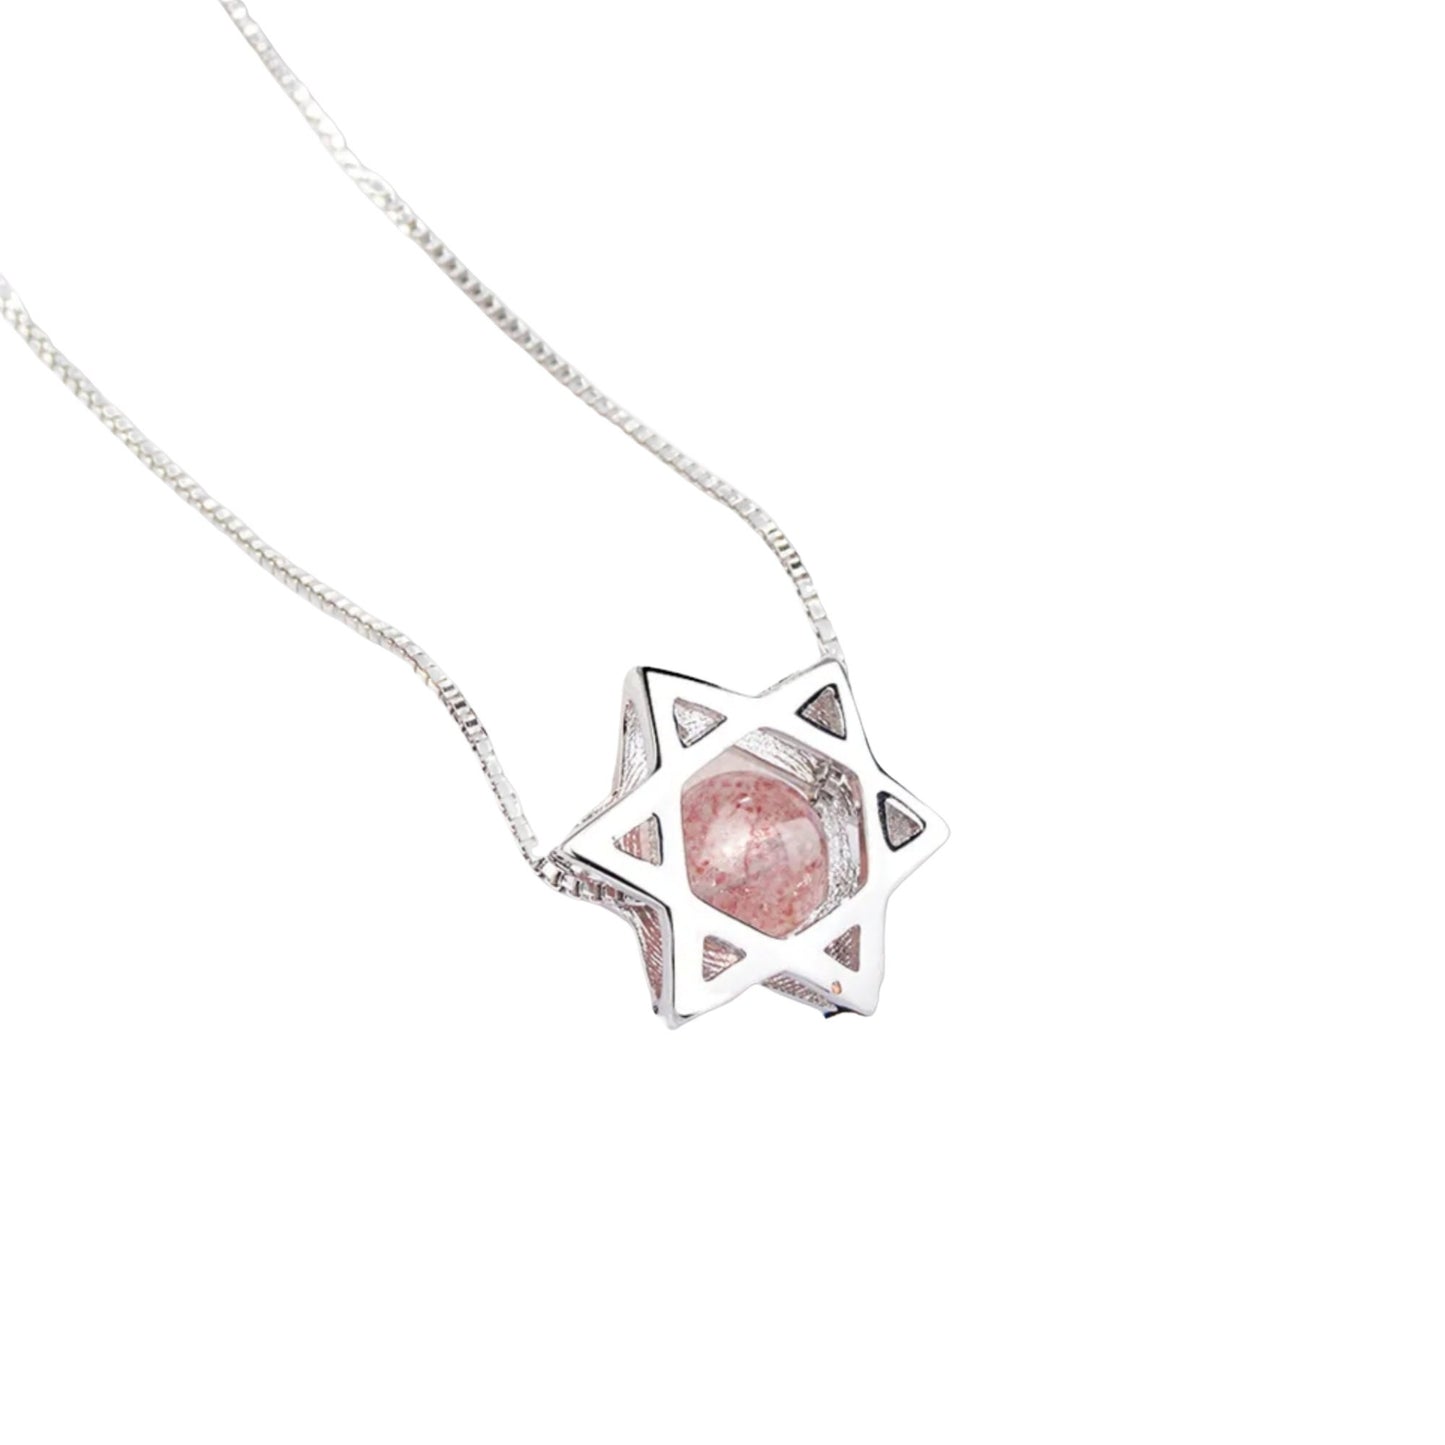 Sterling Silver Star Of David Necklace With Pink/White Quartz